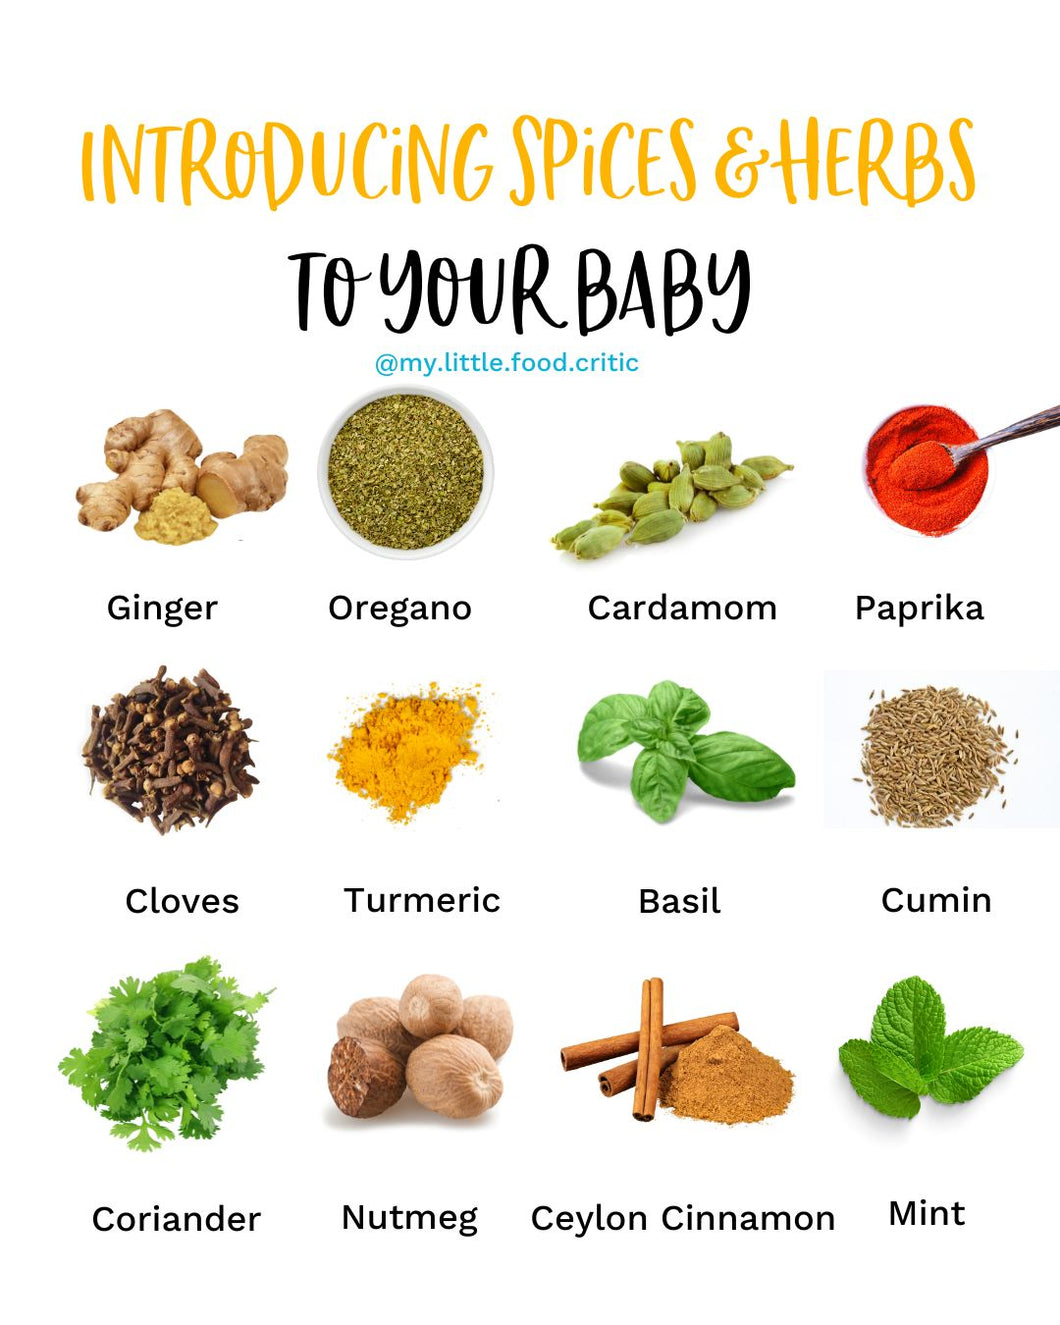 Introducing Spices & Herbs